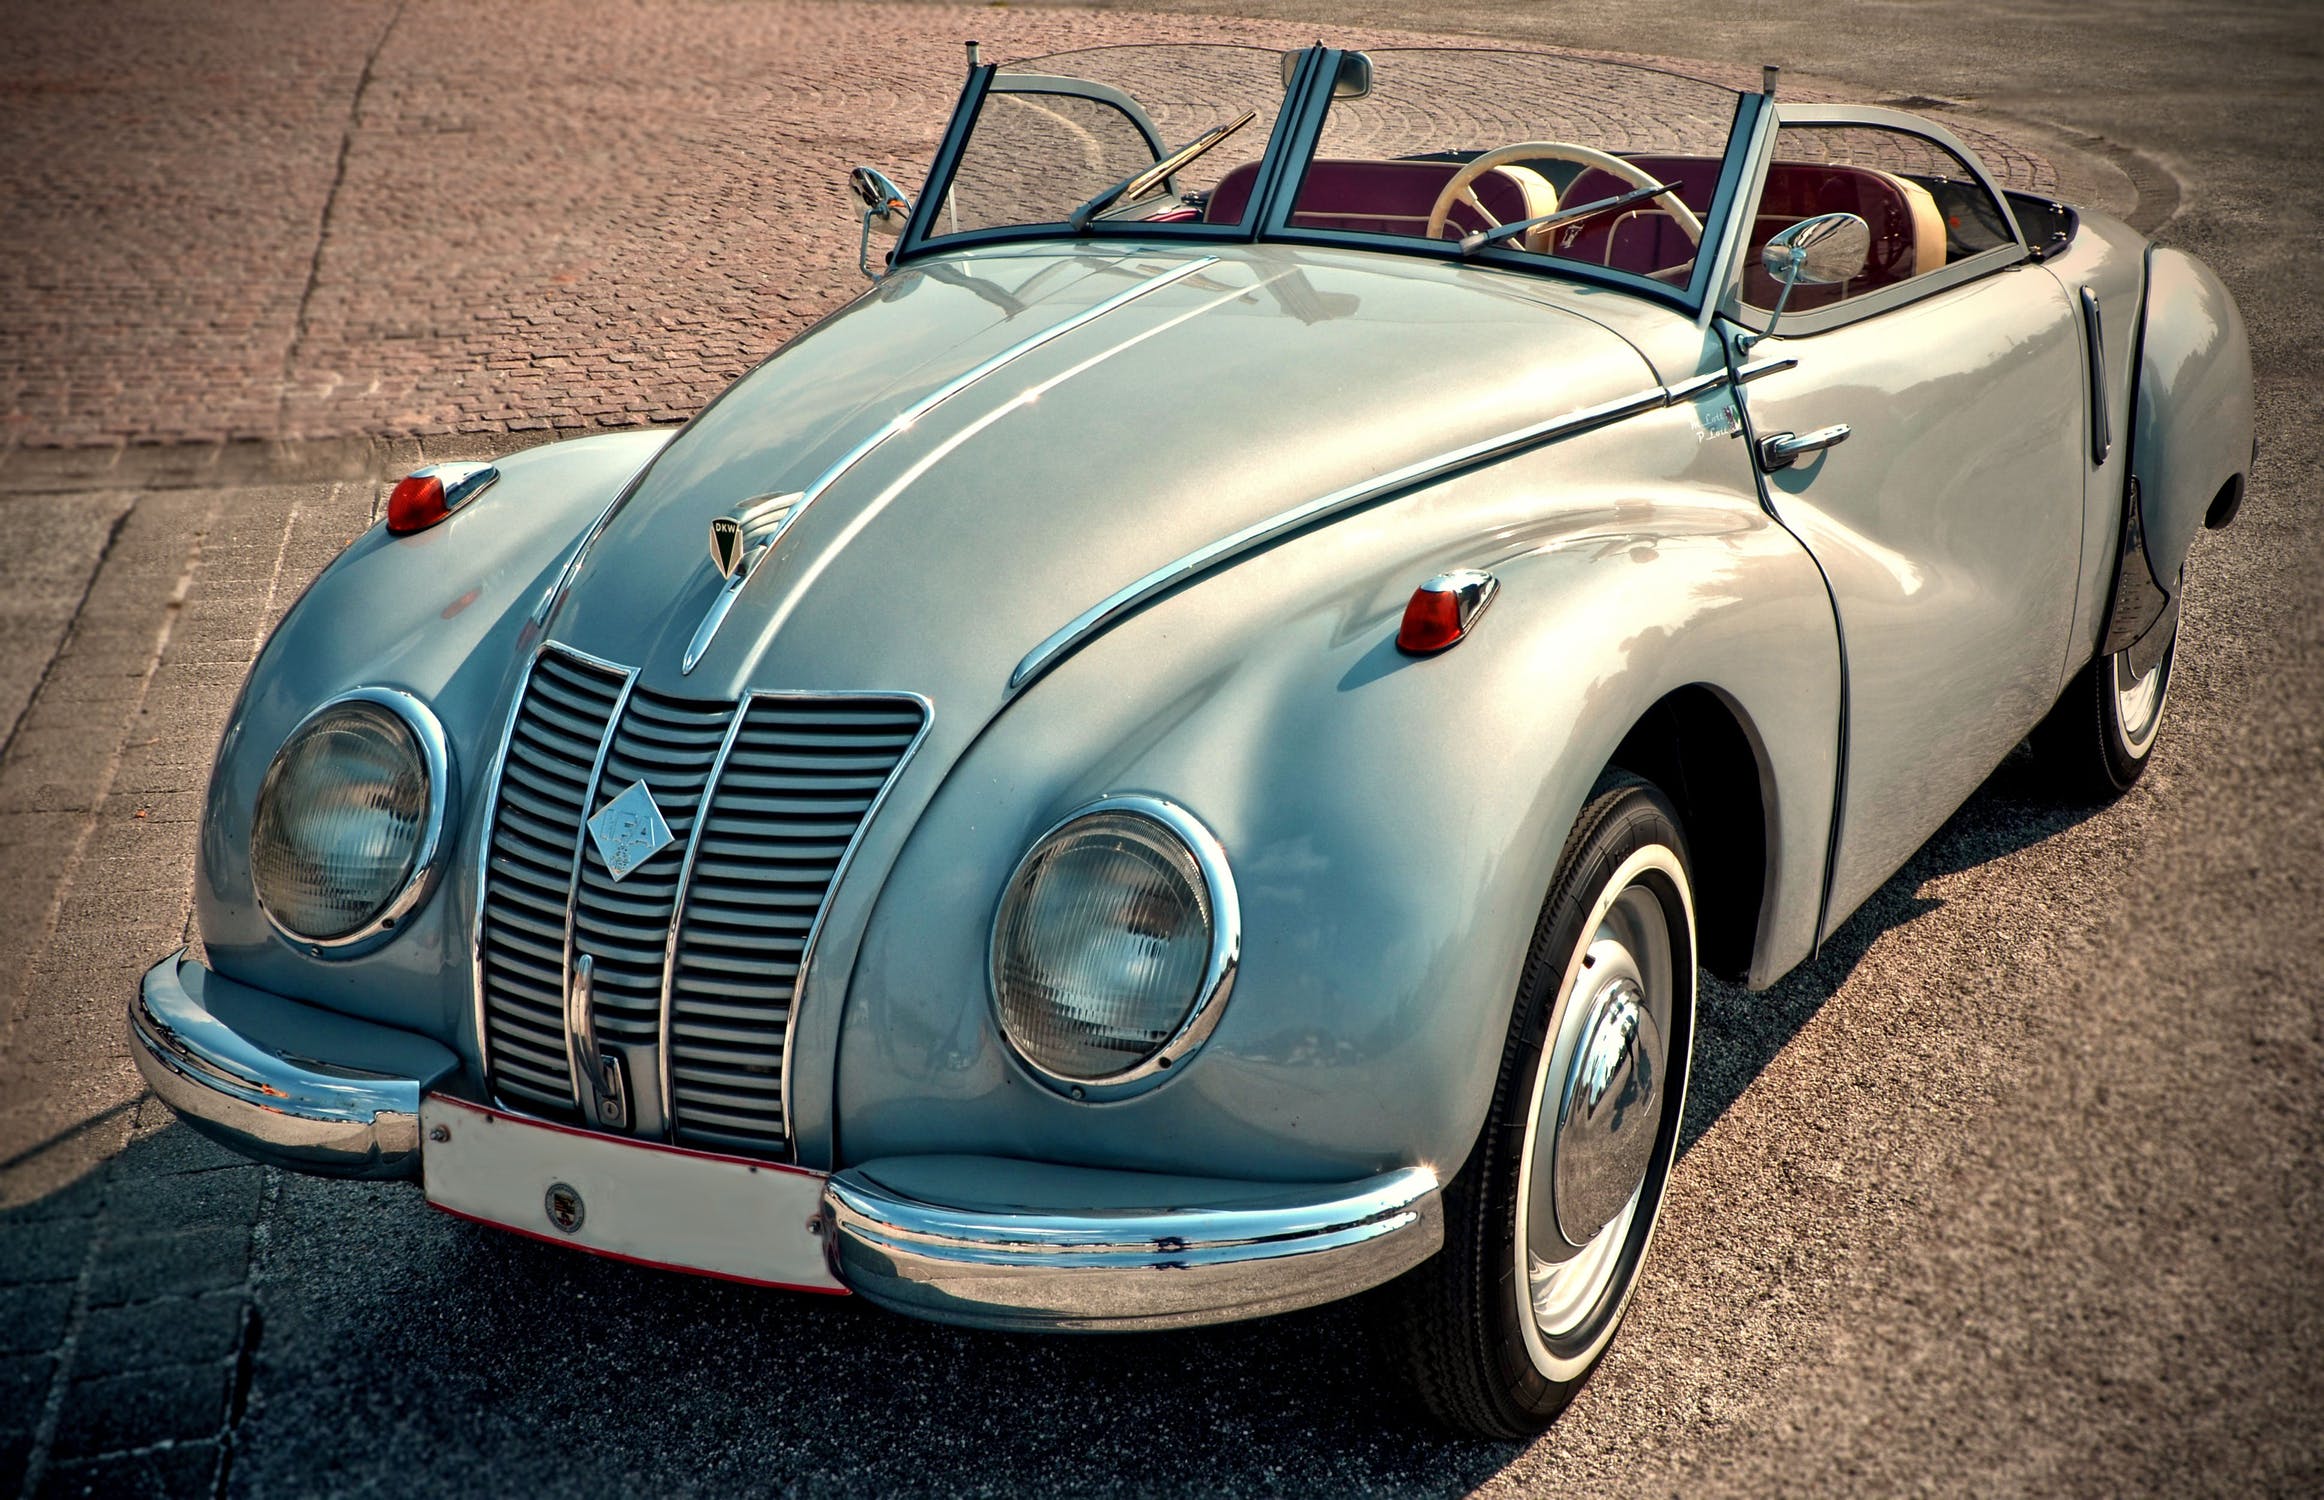 5 Tips To Learn More About Your Classic Car’s History